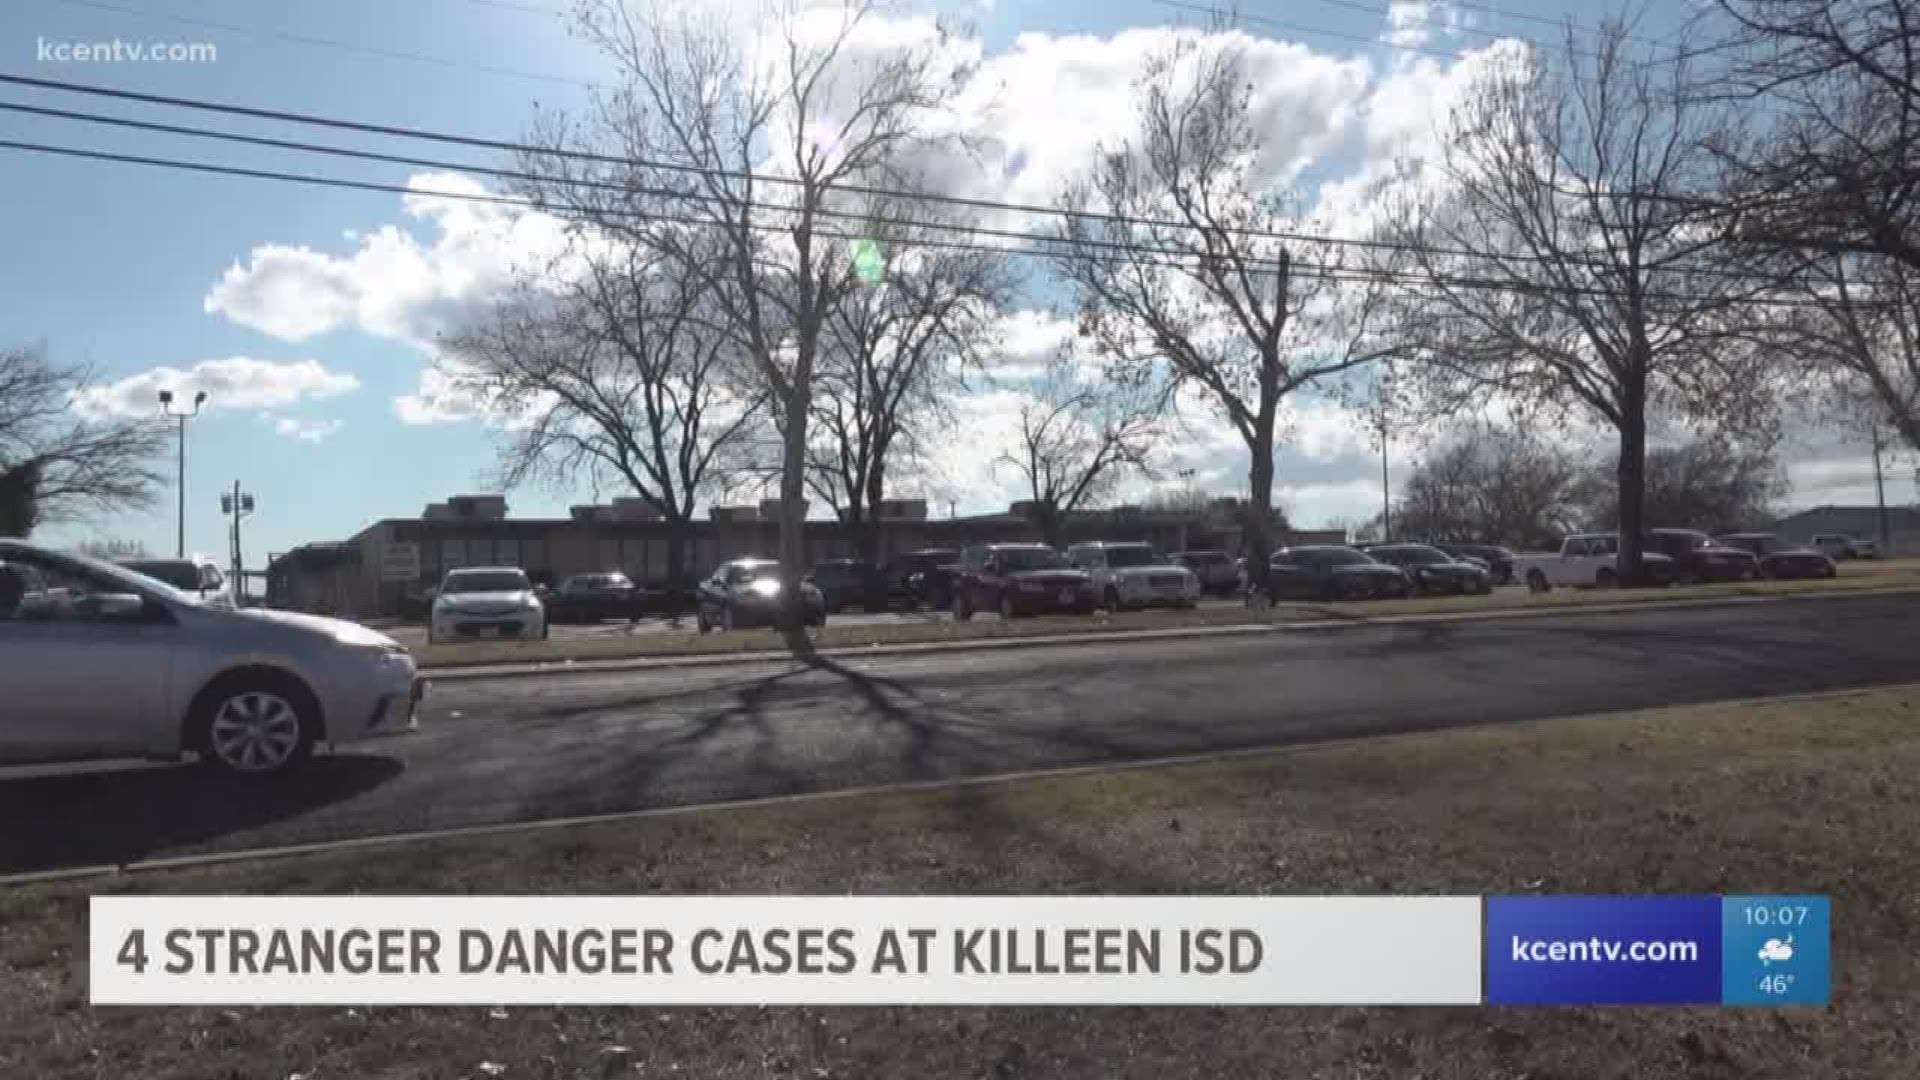 Killeen ISD is asking community members for help in identifying any suspects in 4 stranger danger cases over the last few weeks.